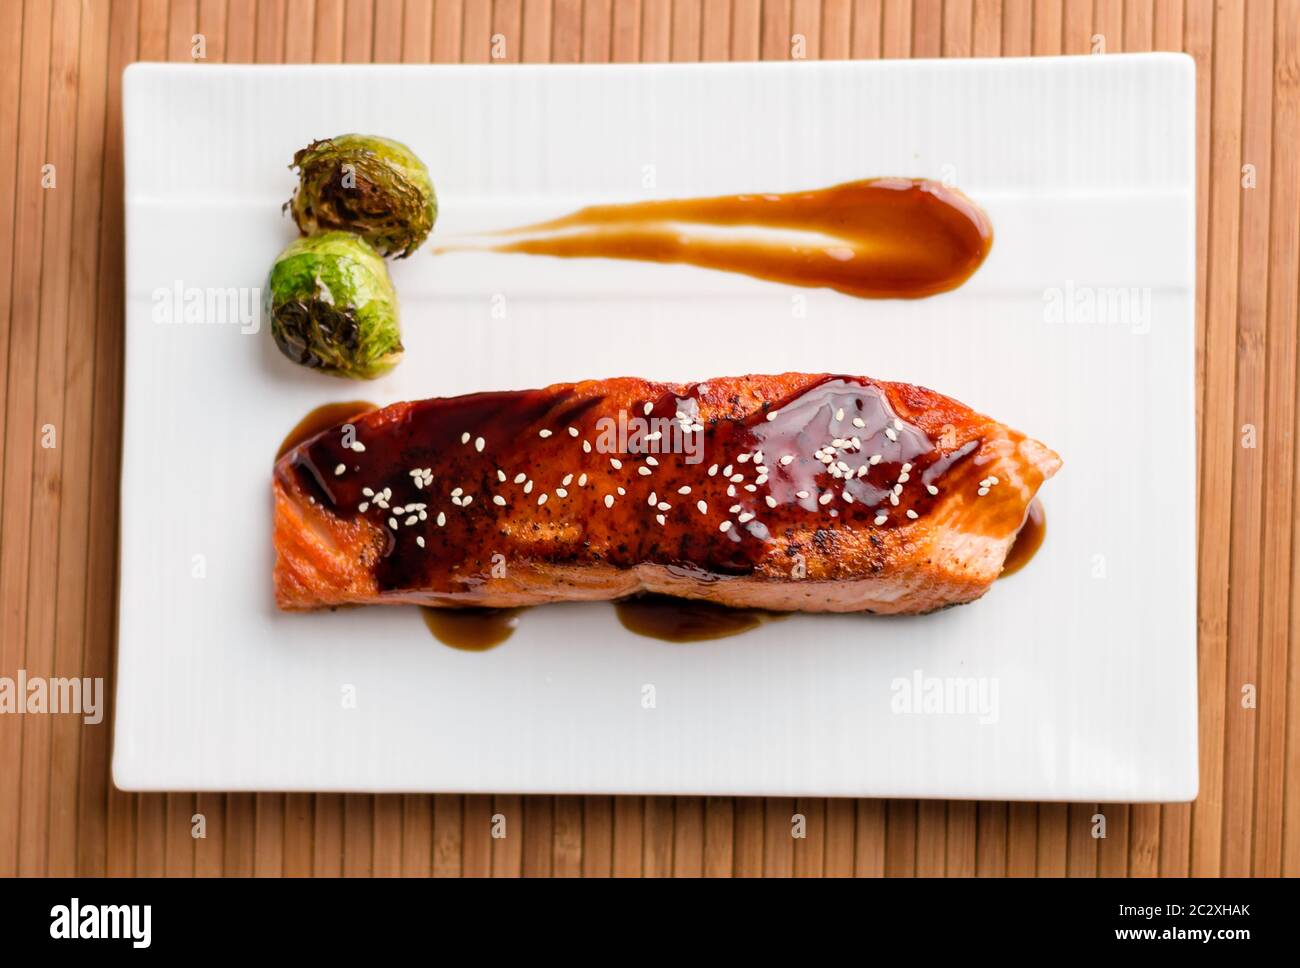 Japanese cuisine inspired food made of grilled salmon fillet glazed in delicious teriyaki sauce (soy sauce base) & Brussels sprouts on white plate. Stock Photo